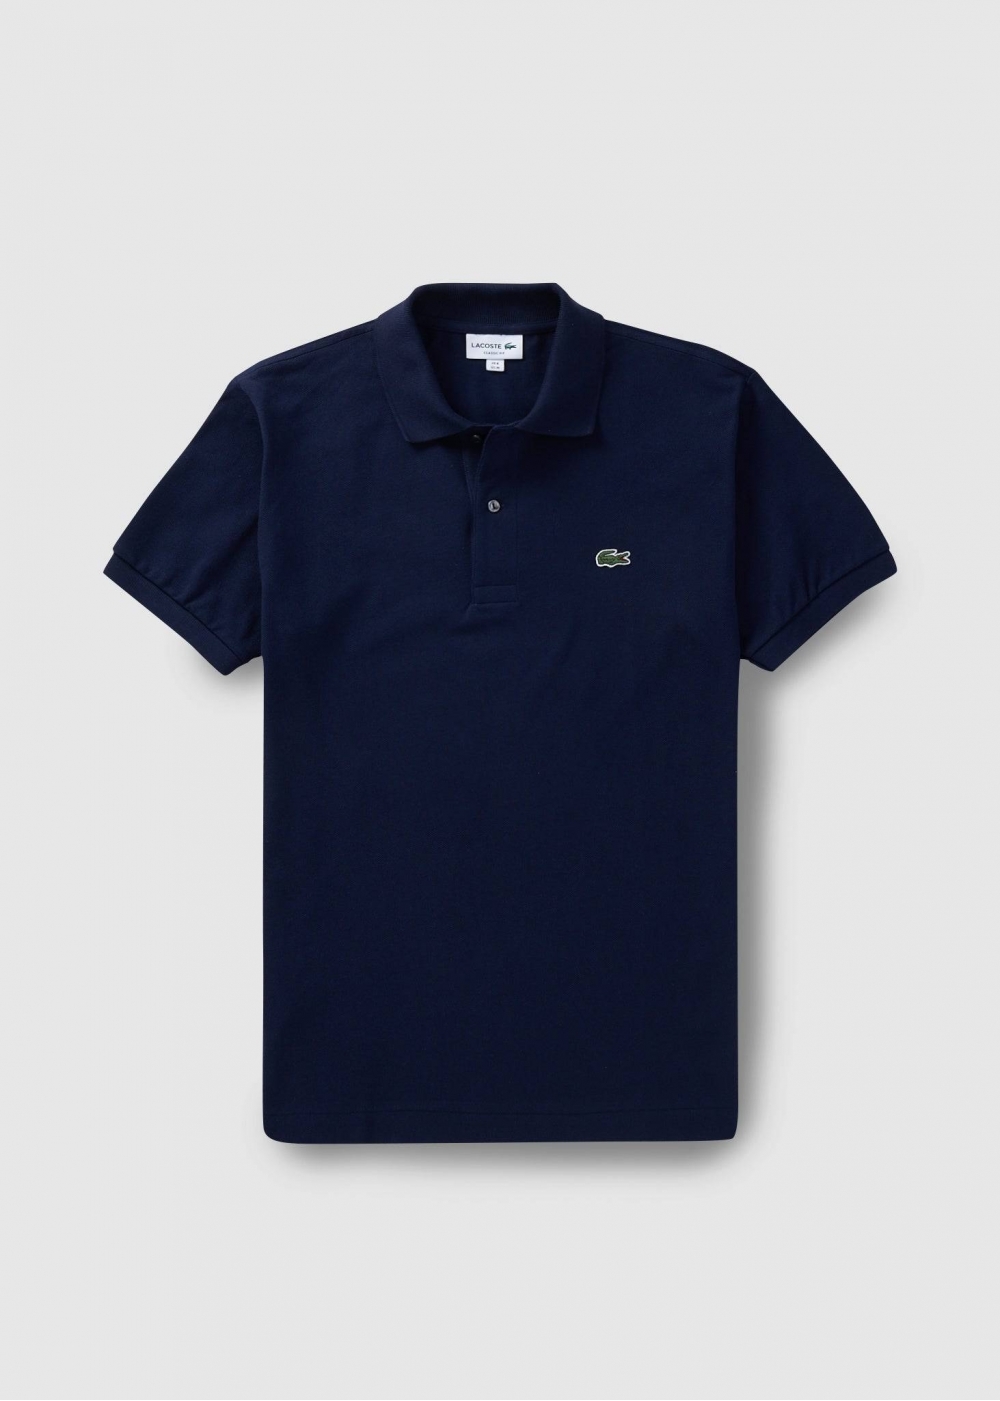 Lacoste Mens Classic Pique Polo Shirt In Navy